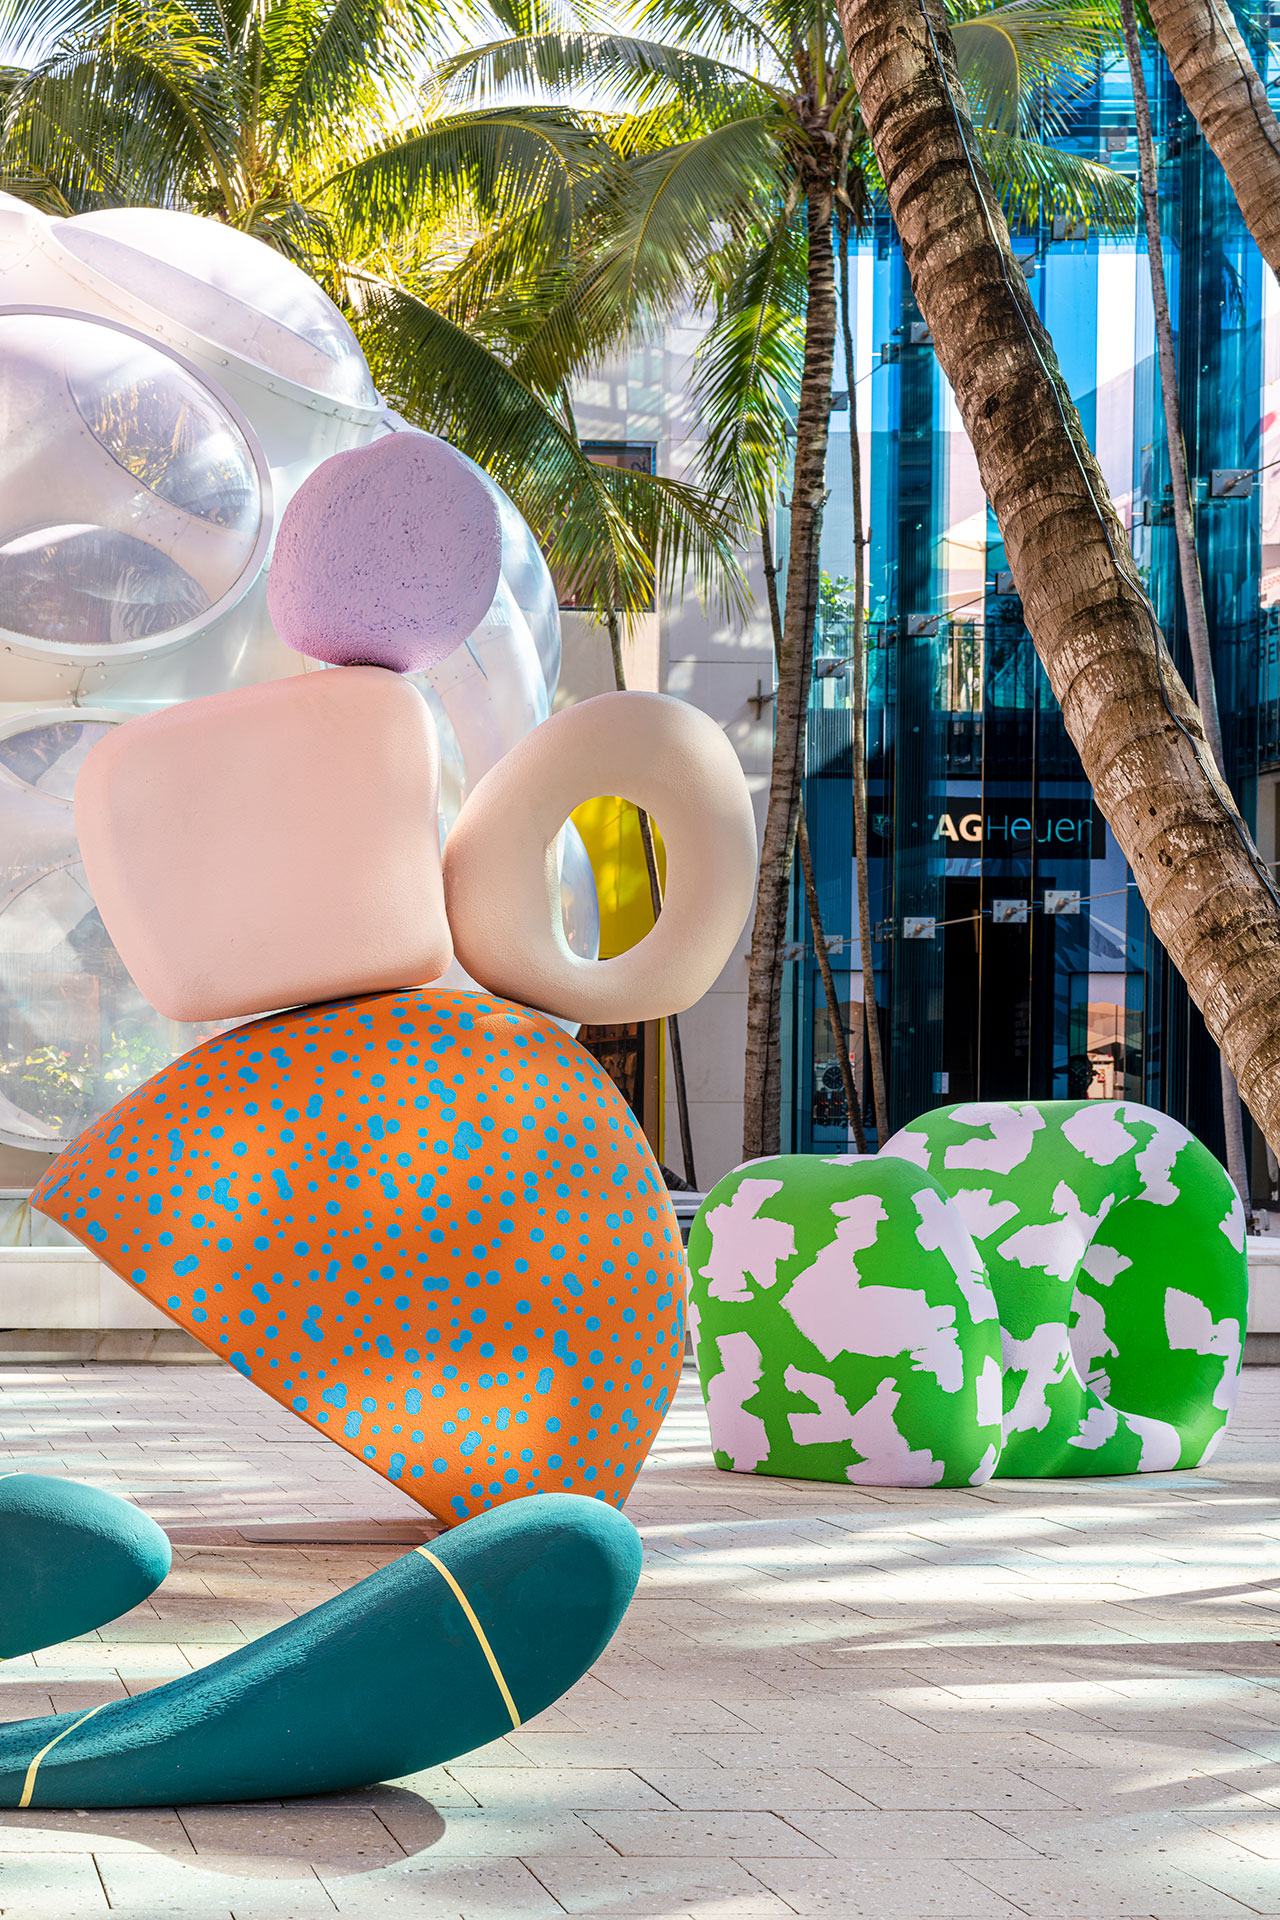 Tomorrow Land at Miami Design District. Photography by Michael Lopez.